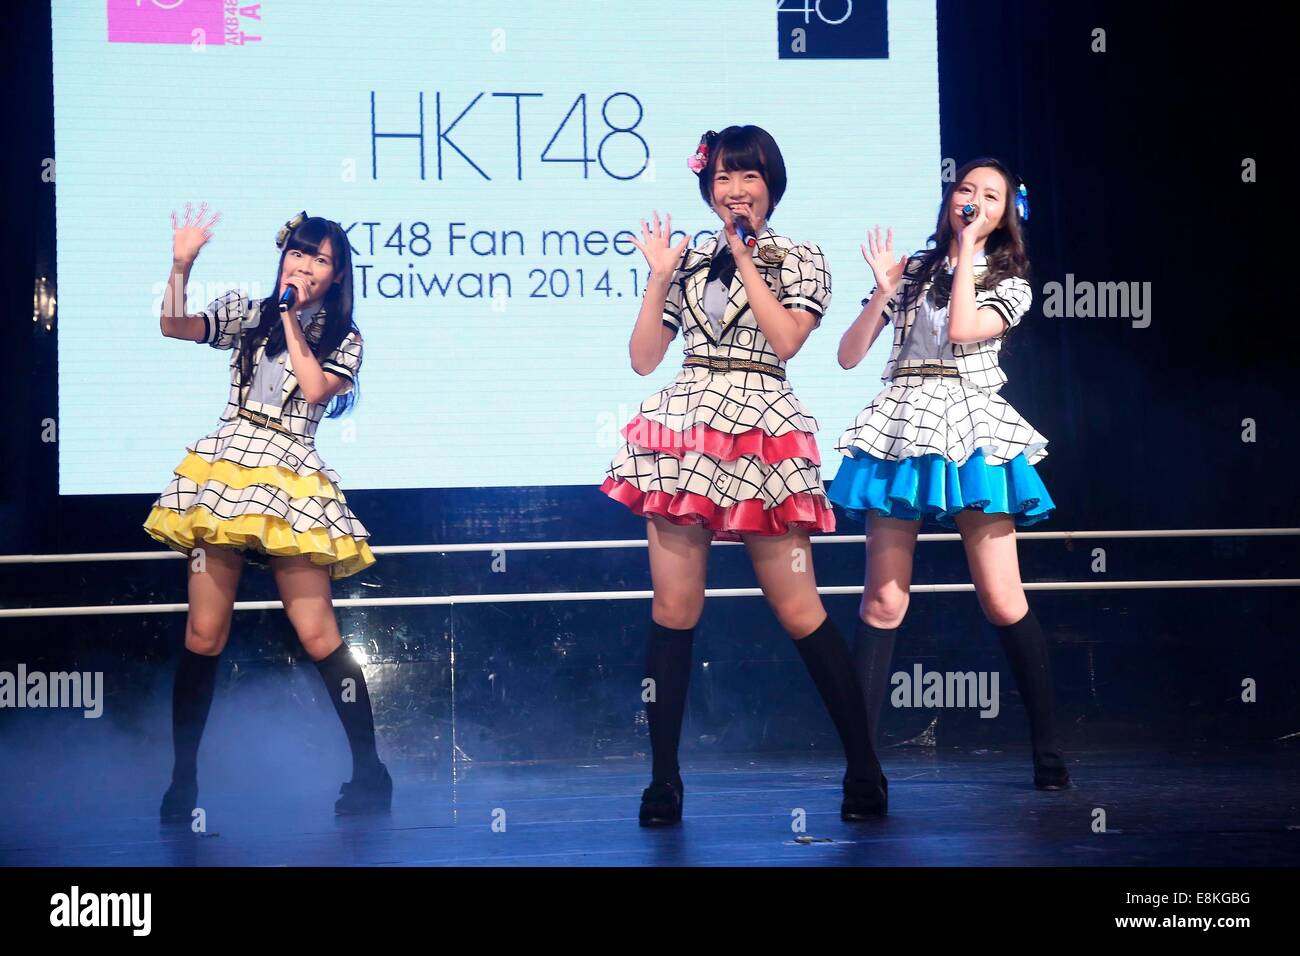 Three members of Japanese idol group HKT48 come to Taipei for fans meeting conference to promote their coming concert in Taipei, Taiwan, China on 9th October, 2014. Stock Photo